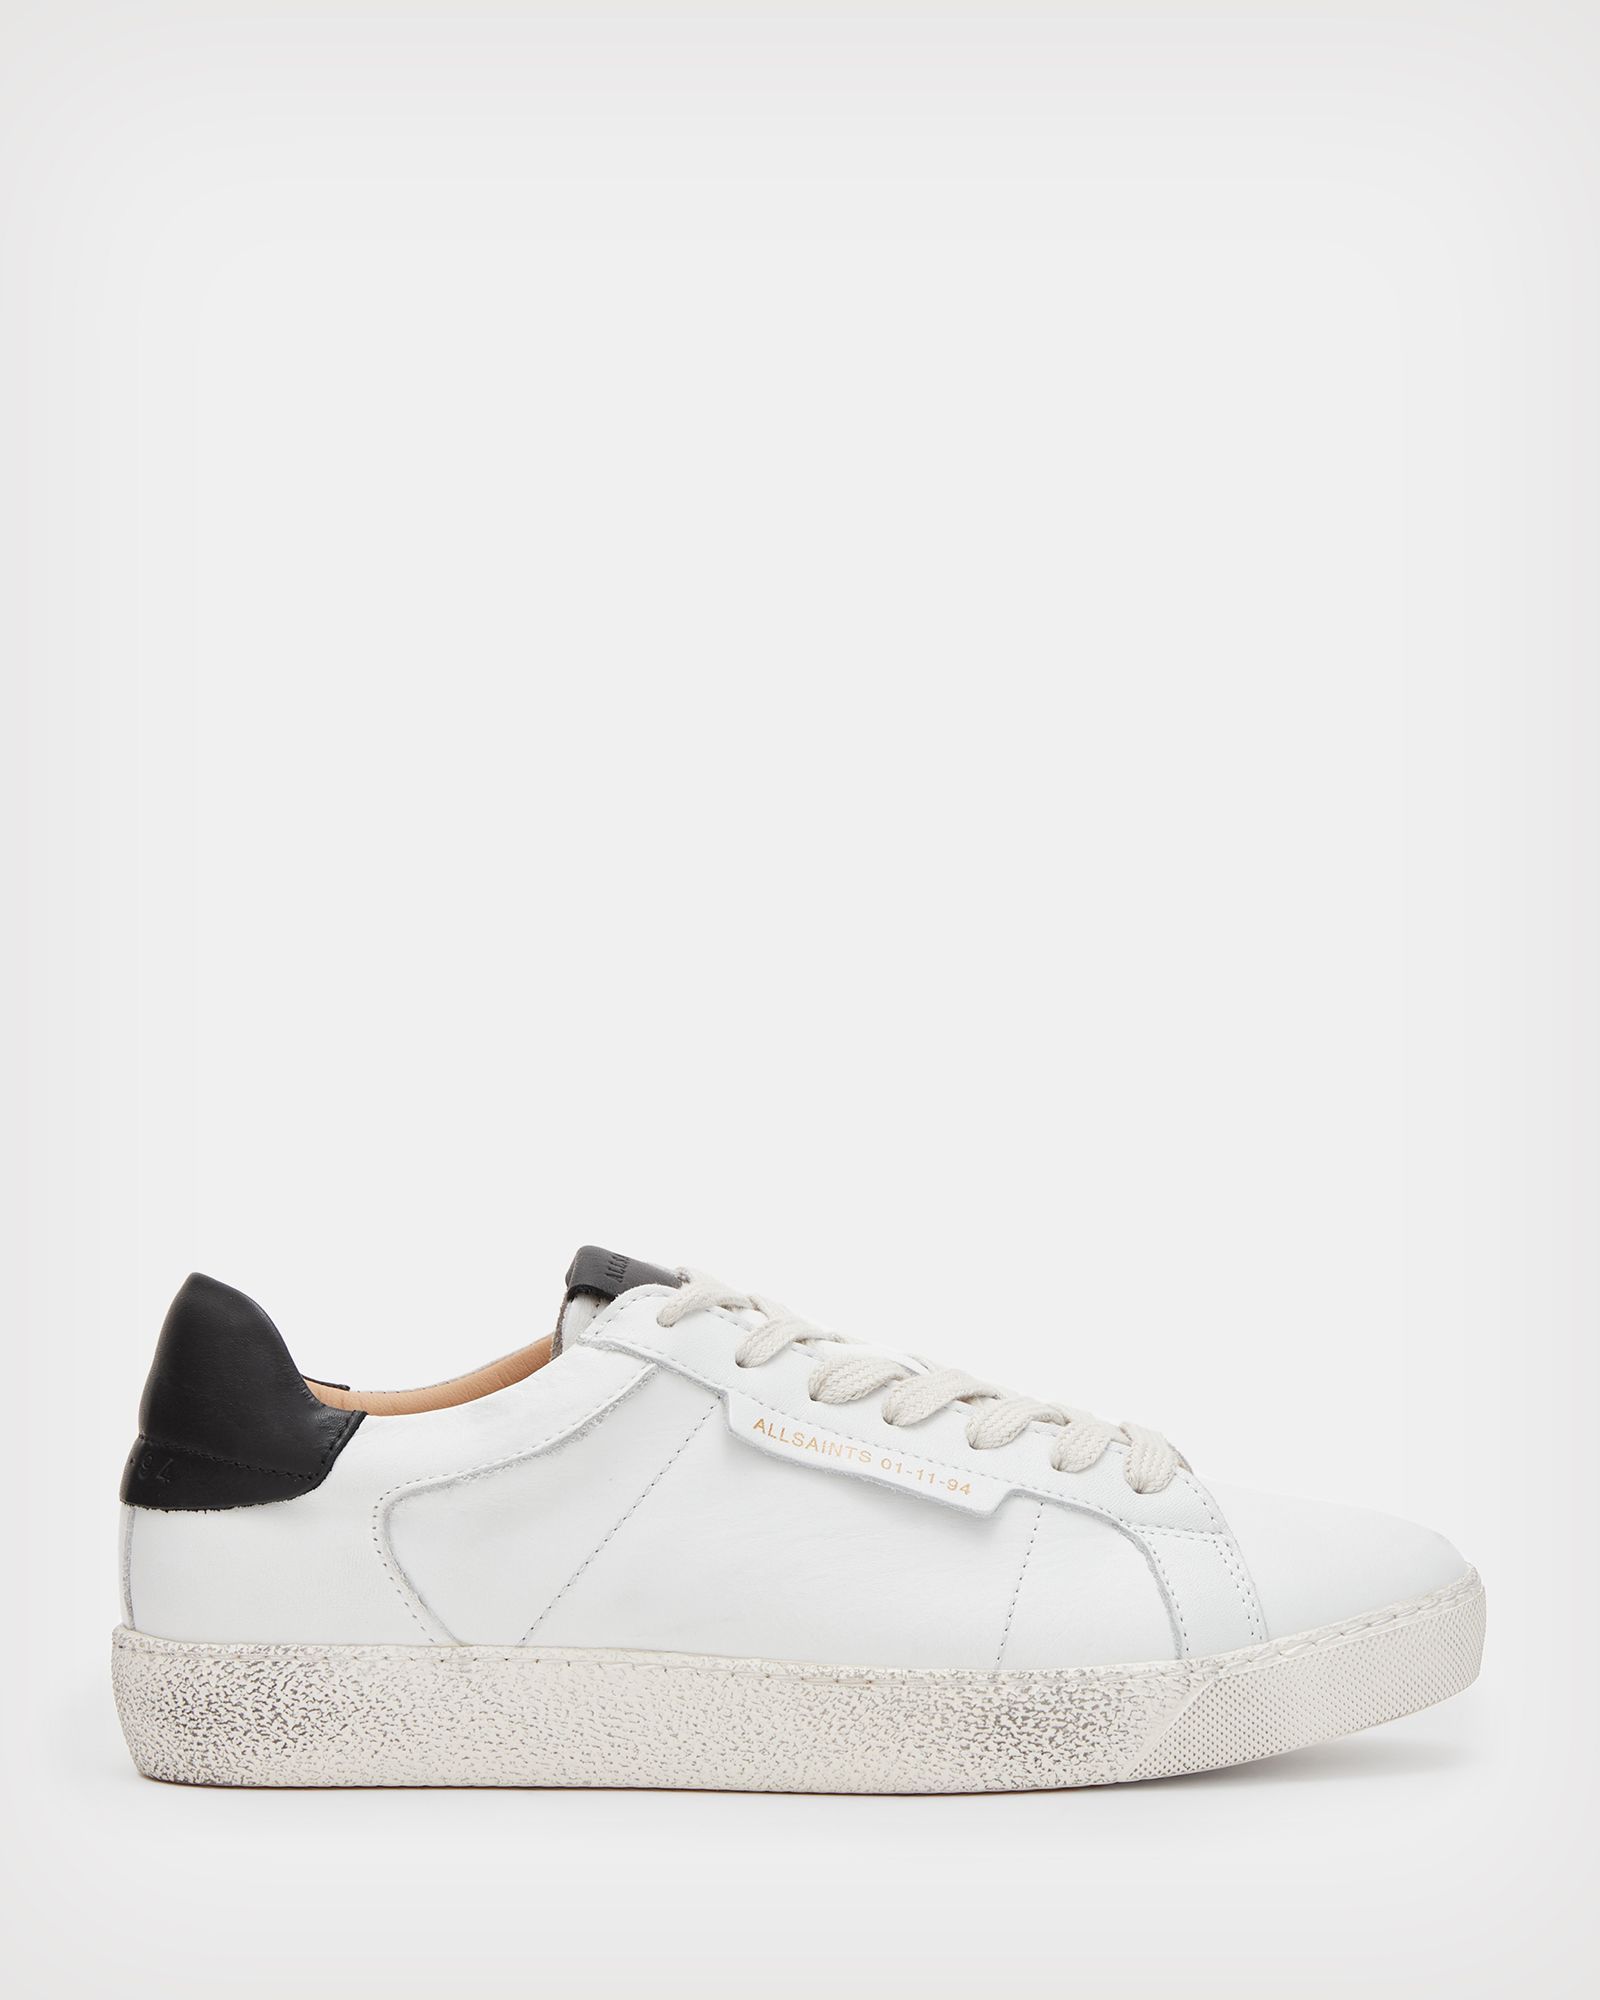 Sheer Leather Low Top Trainers White/Black | ALLSAINTS